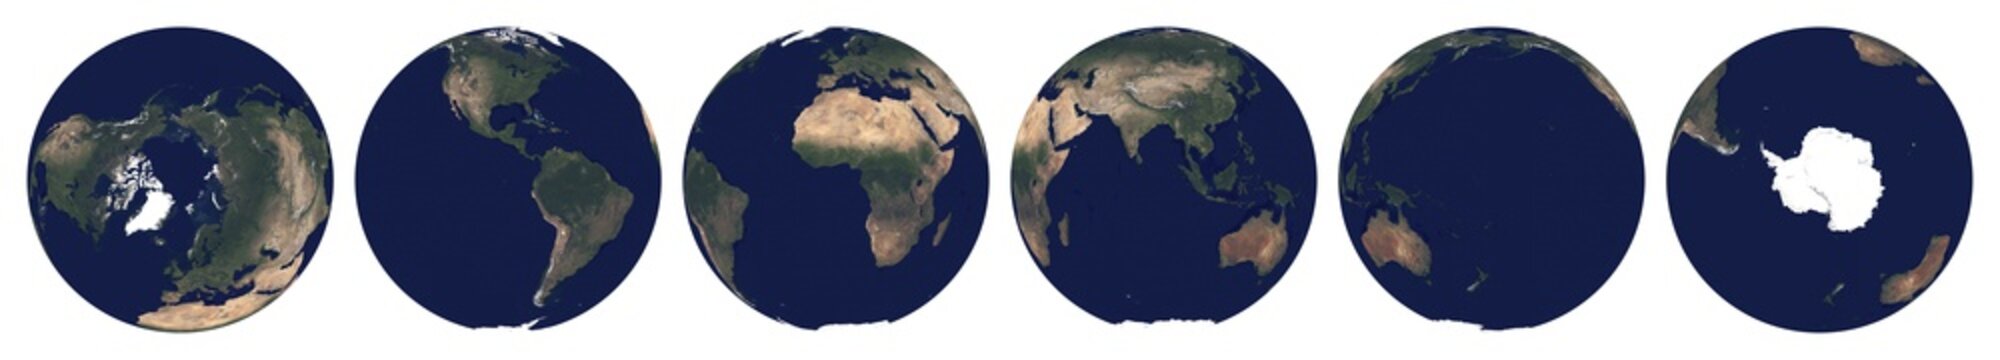 Earth from space. Set of satellite images of planet Earth. Realistic photo of Earth frome above. Space views of hemispheres. Texture of Earth. Elements of this image furnished by NASA.